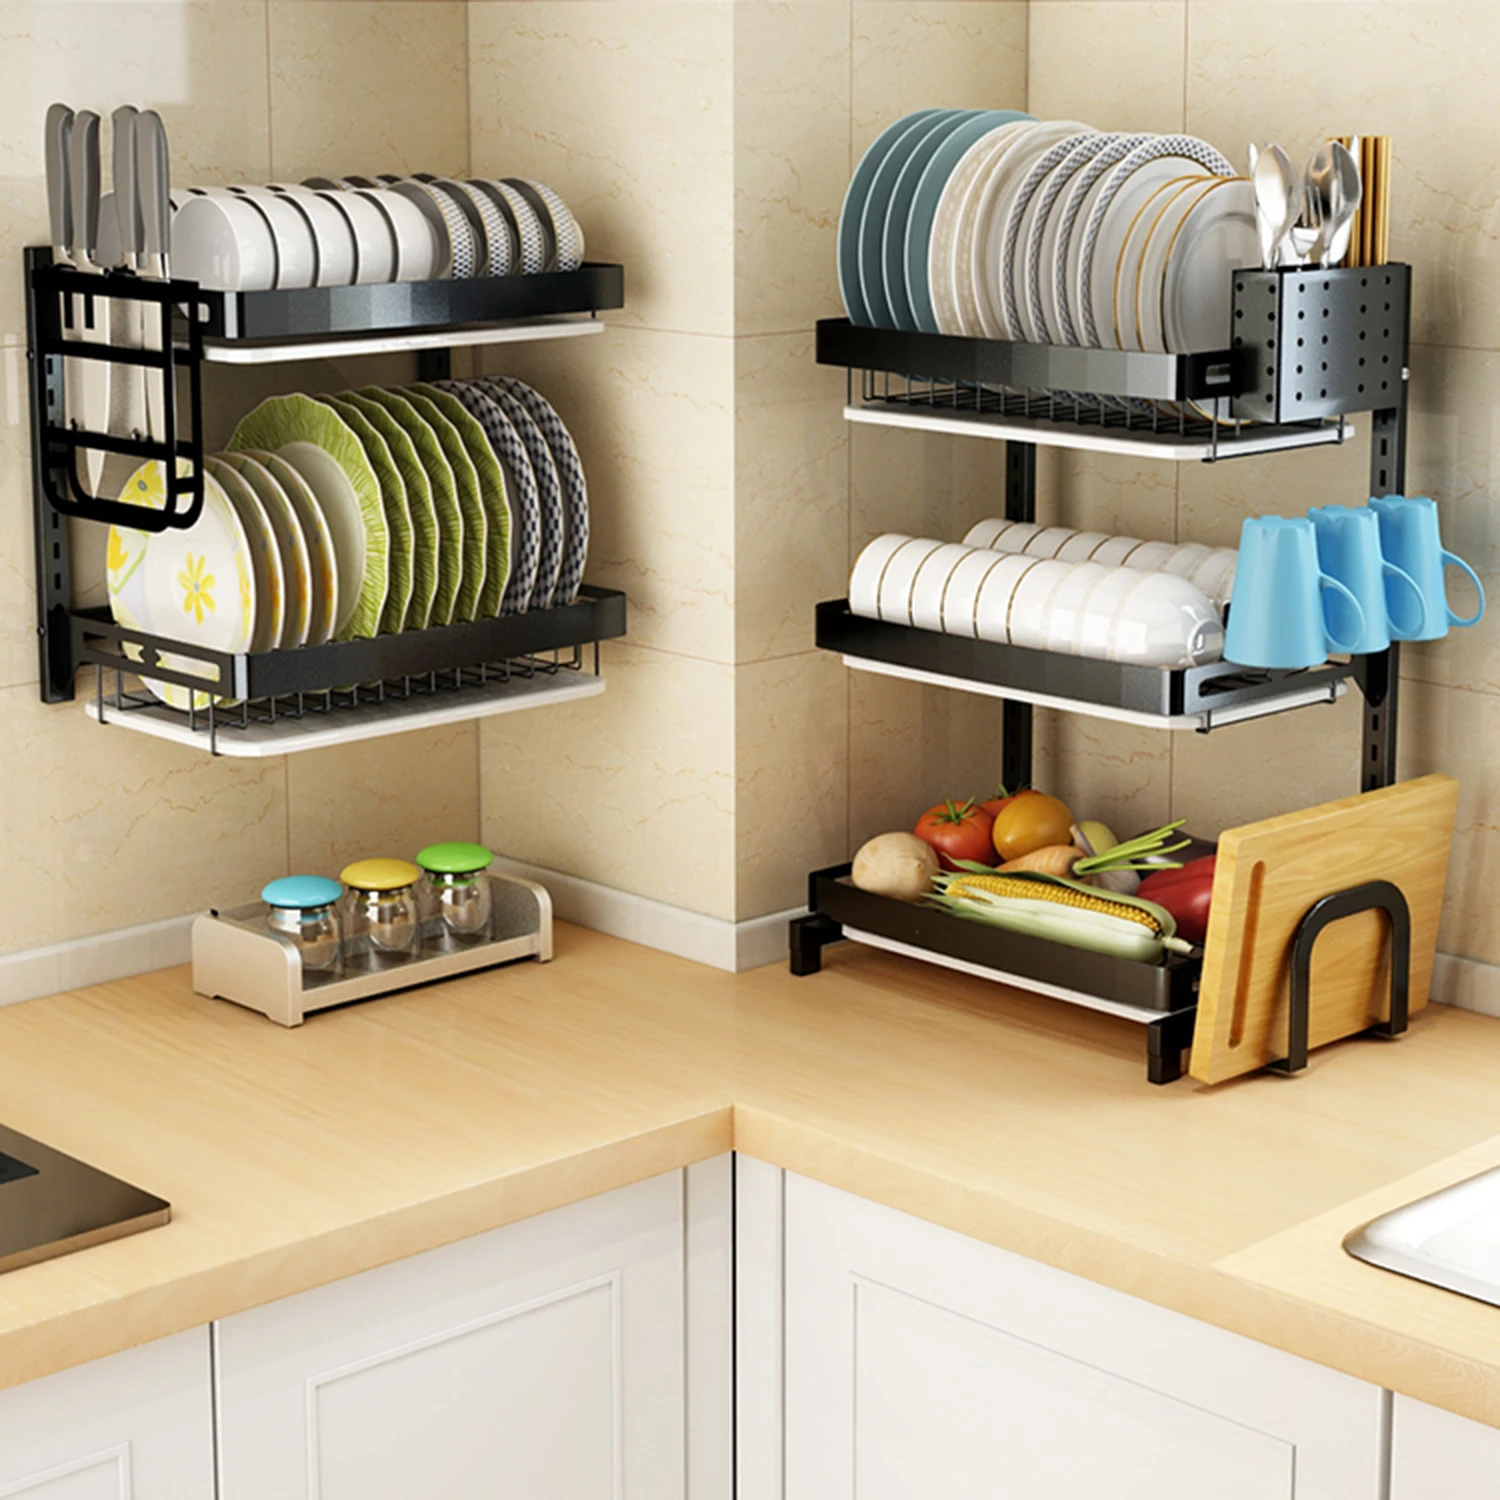 Kitchen Hanging Drying Dish Rack, 2 Tier Wall Mount Plate Bowl Organizer Storage Holder with Drain Tray